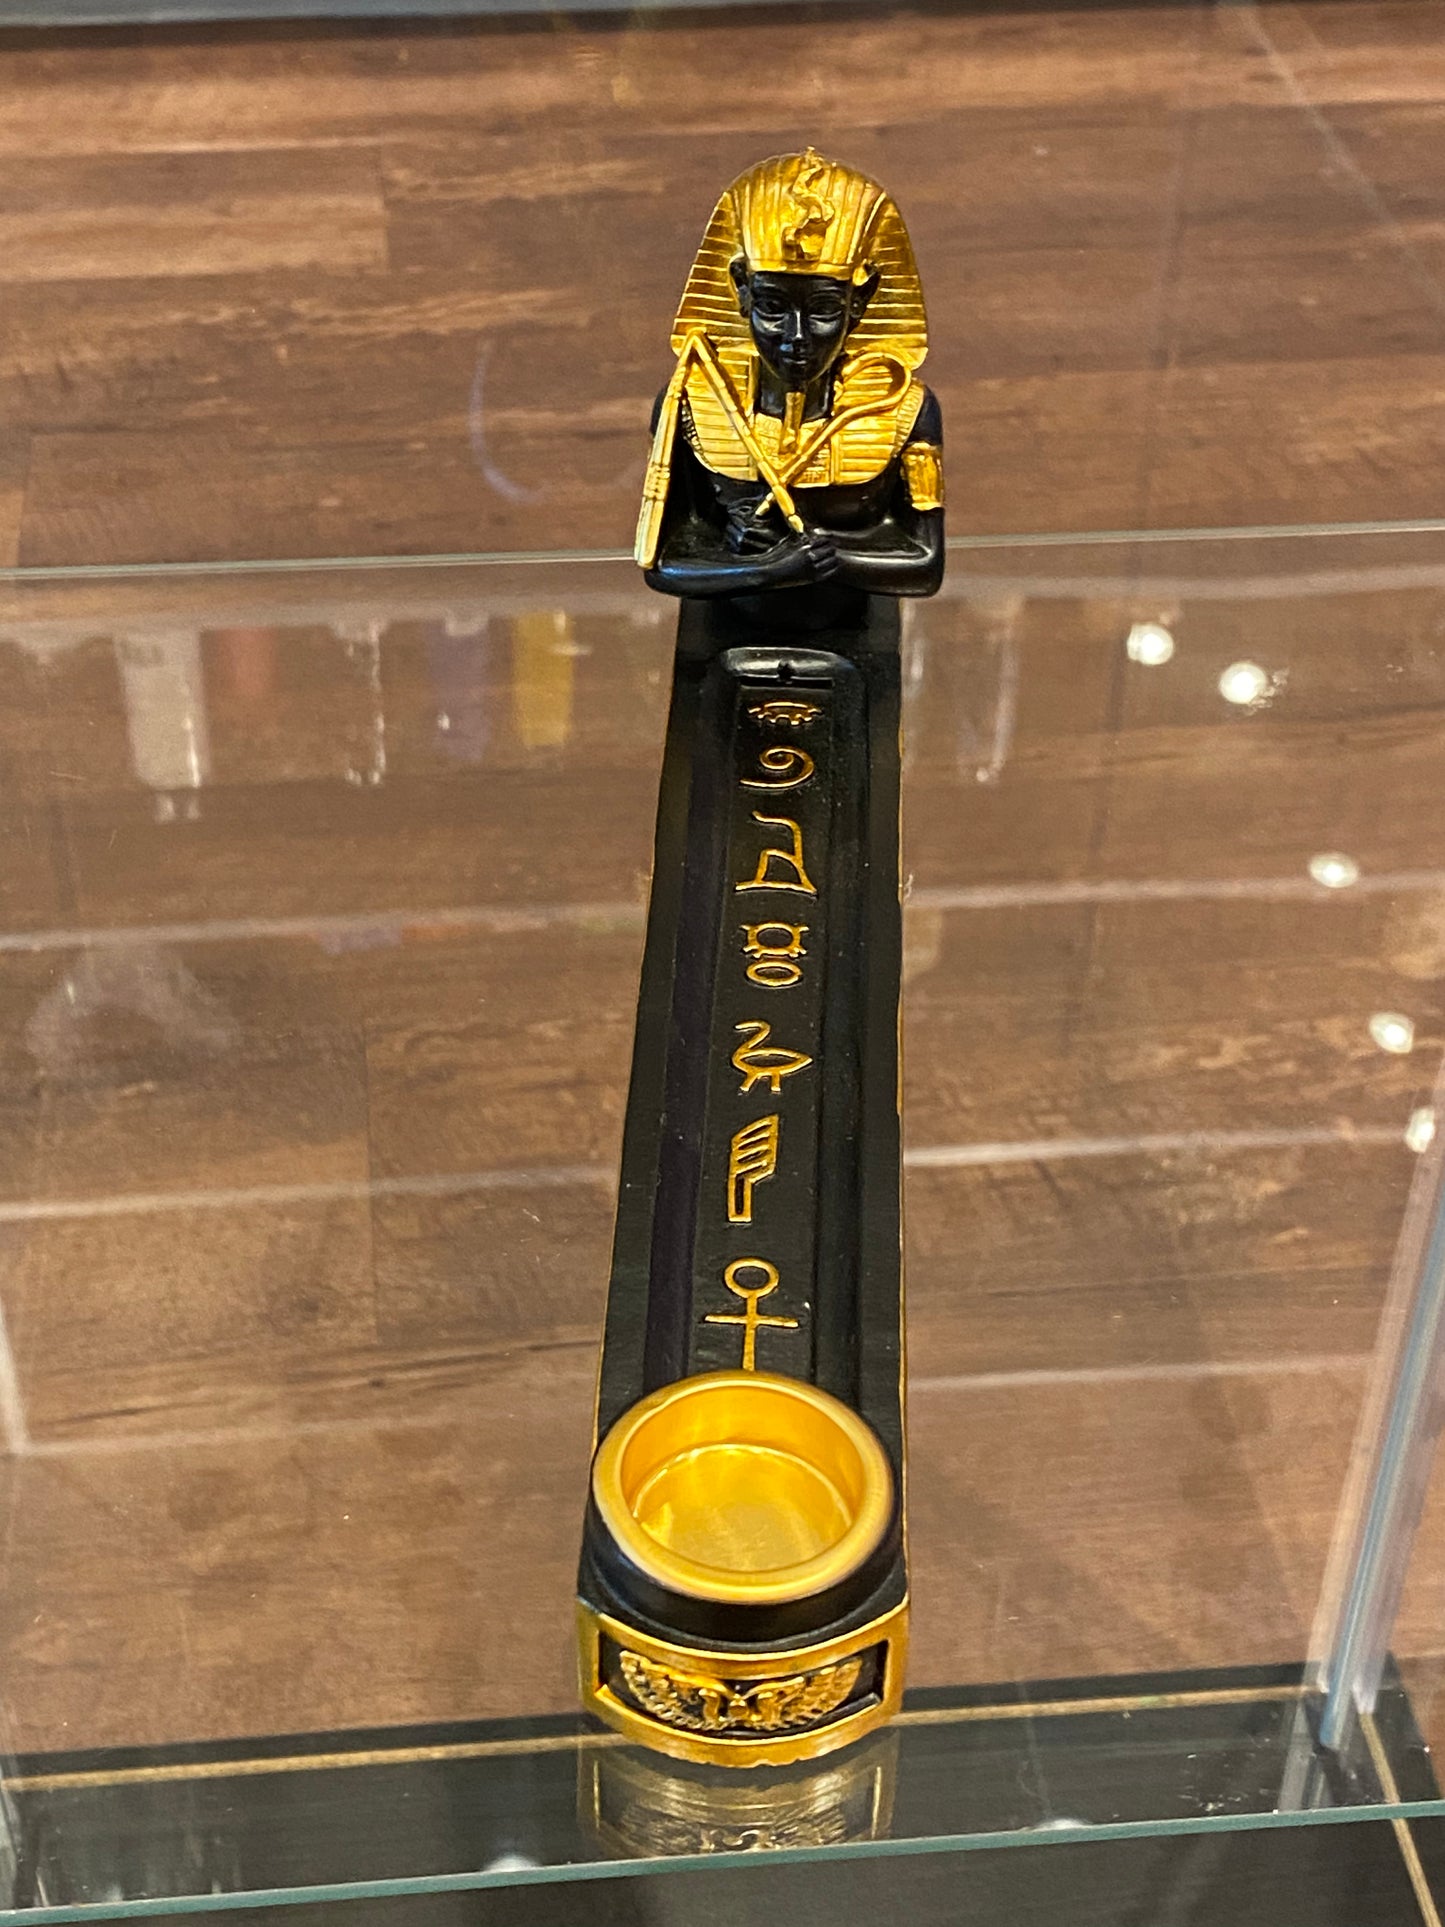 Black And Gold Pharaoh King Incense Stick and Cone Holder